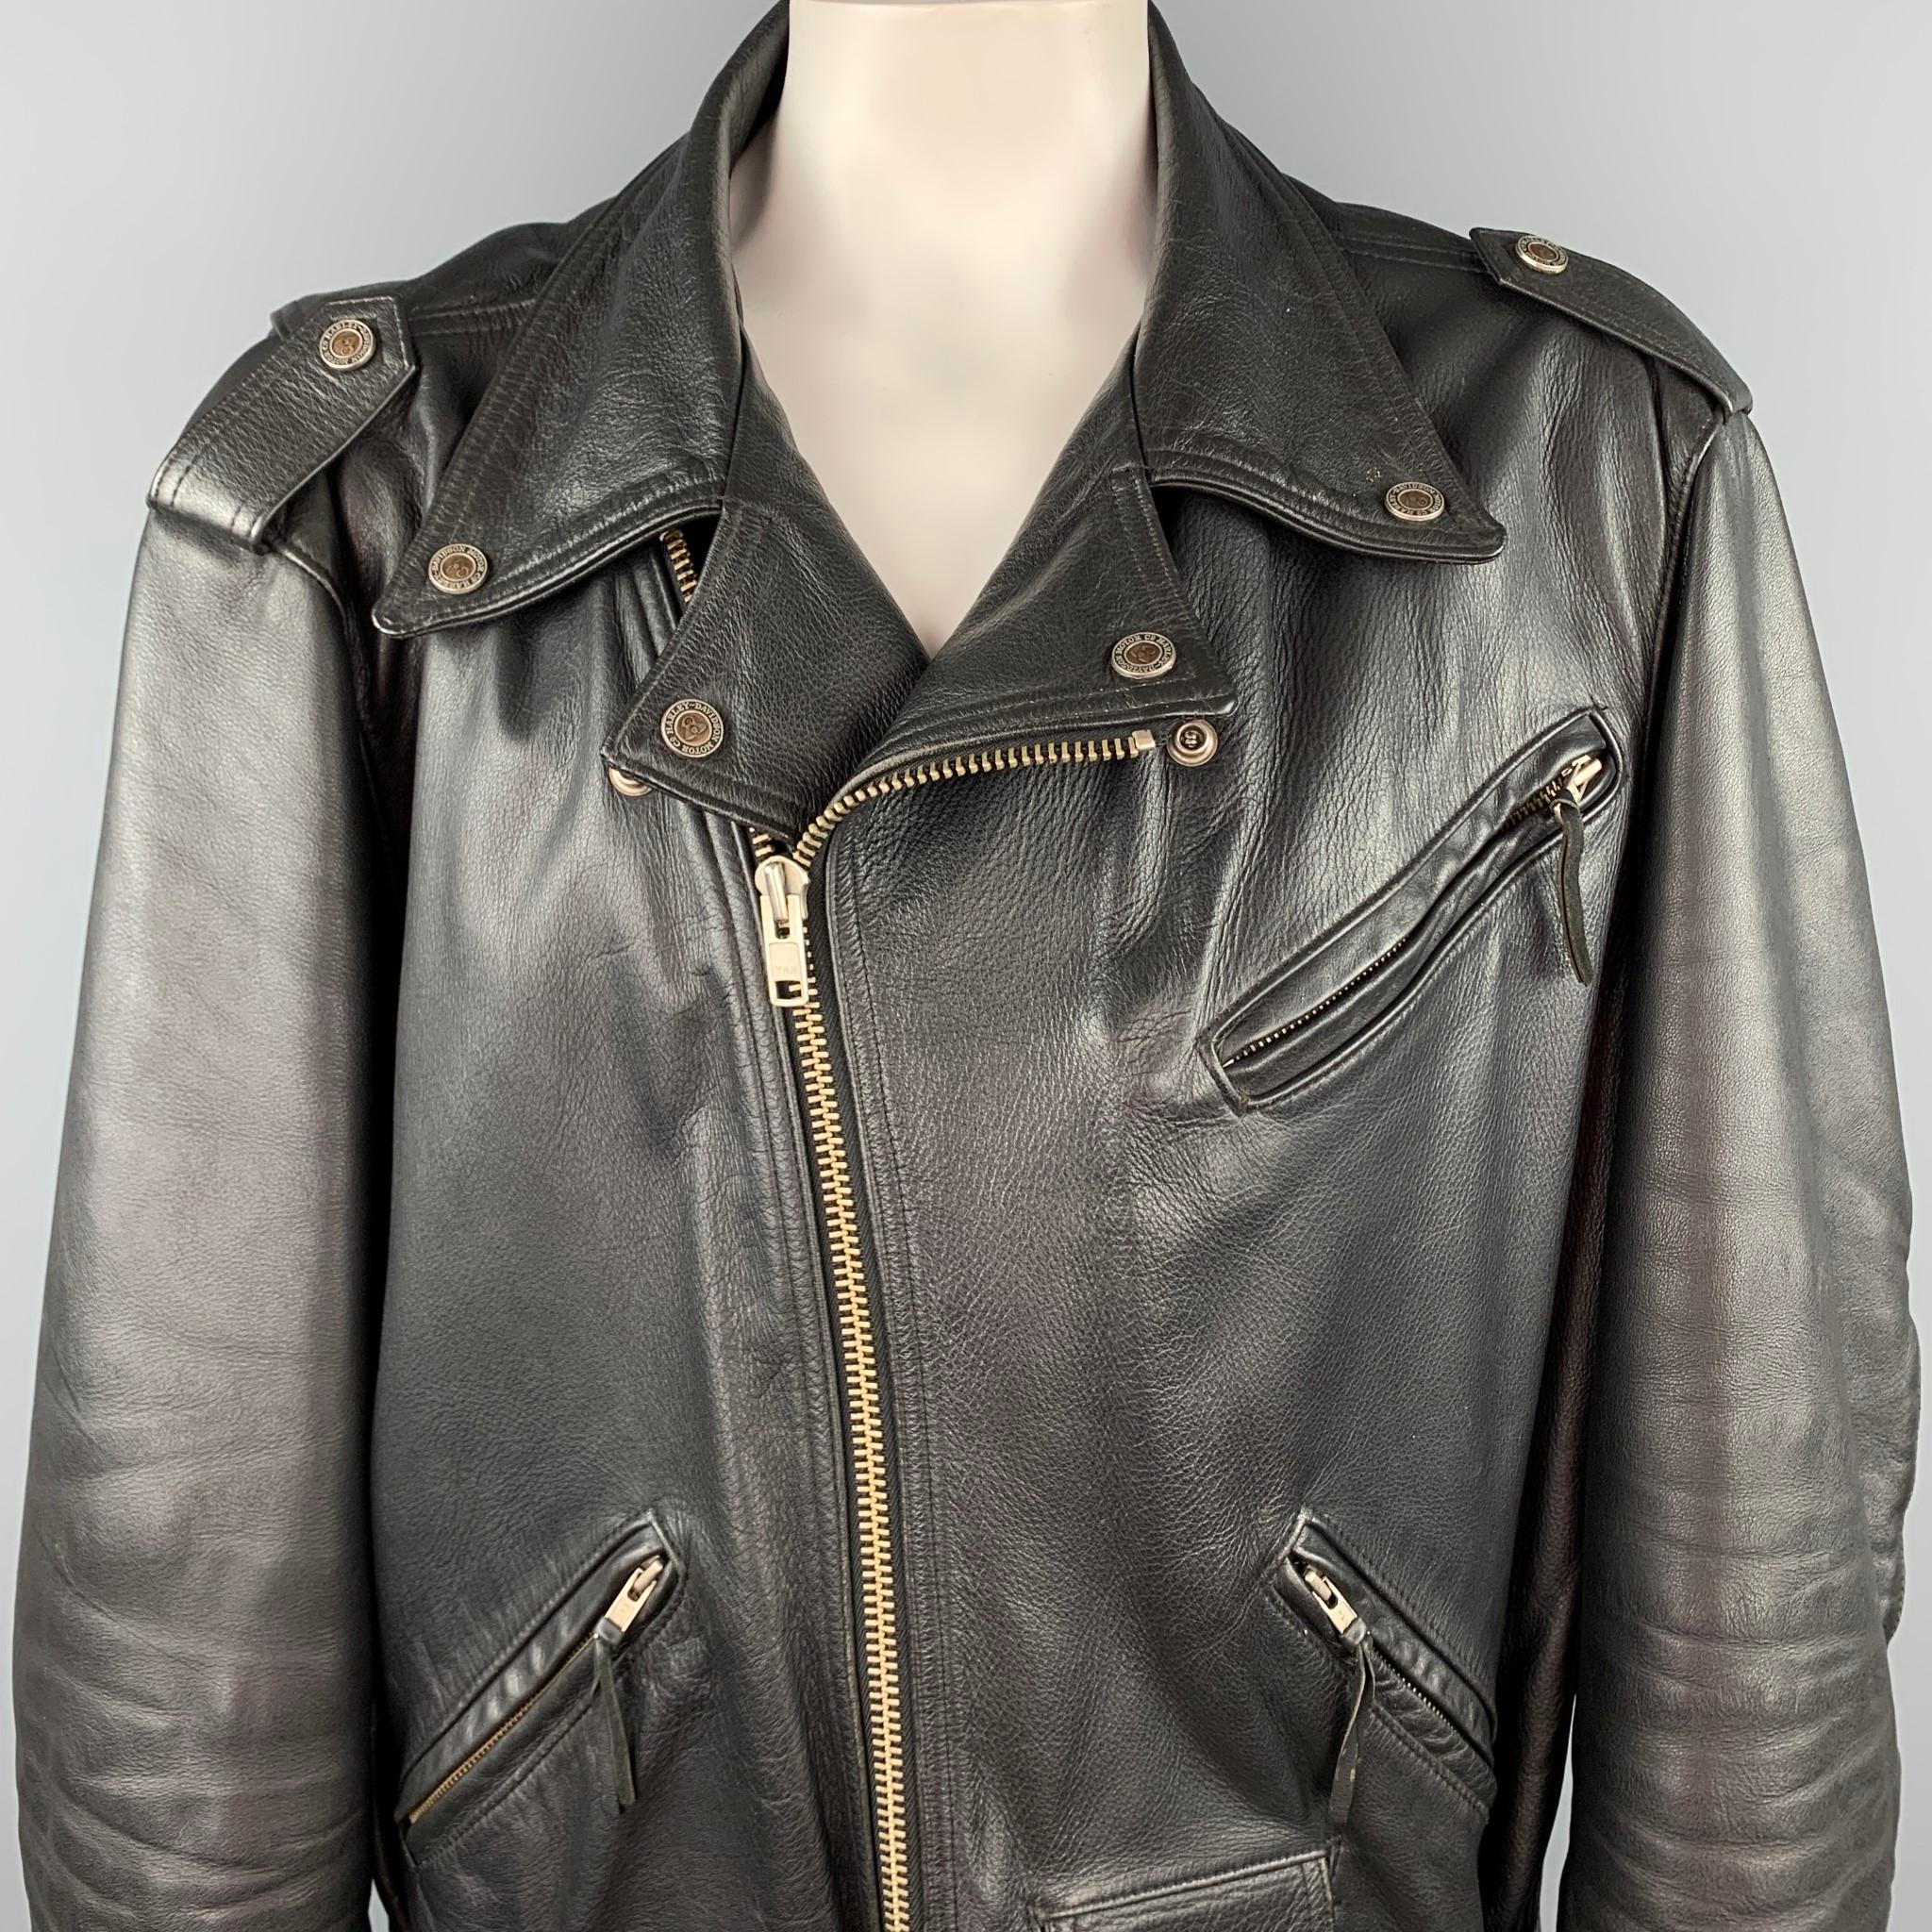 HARLEY DAVIDSON jacket comes in a black leather with a quilted liner featuring a motorcycle style, epaulettes, belted, front pockets, zipper sleeves, and a zip up closure.

Good Pre-Owned Condition.
Marked: XXL

Measurements:

Shoulder: 24